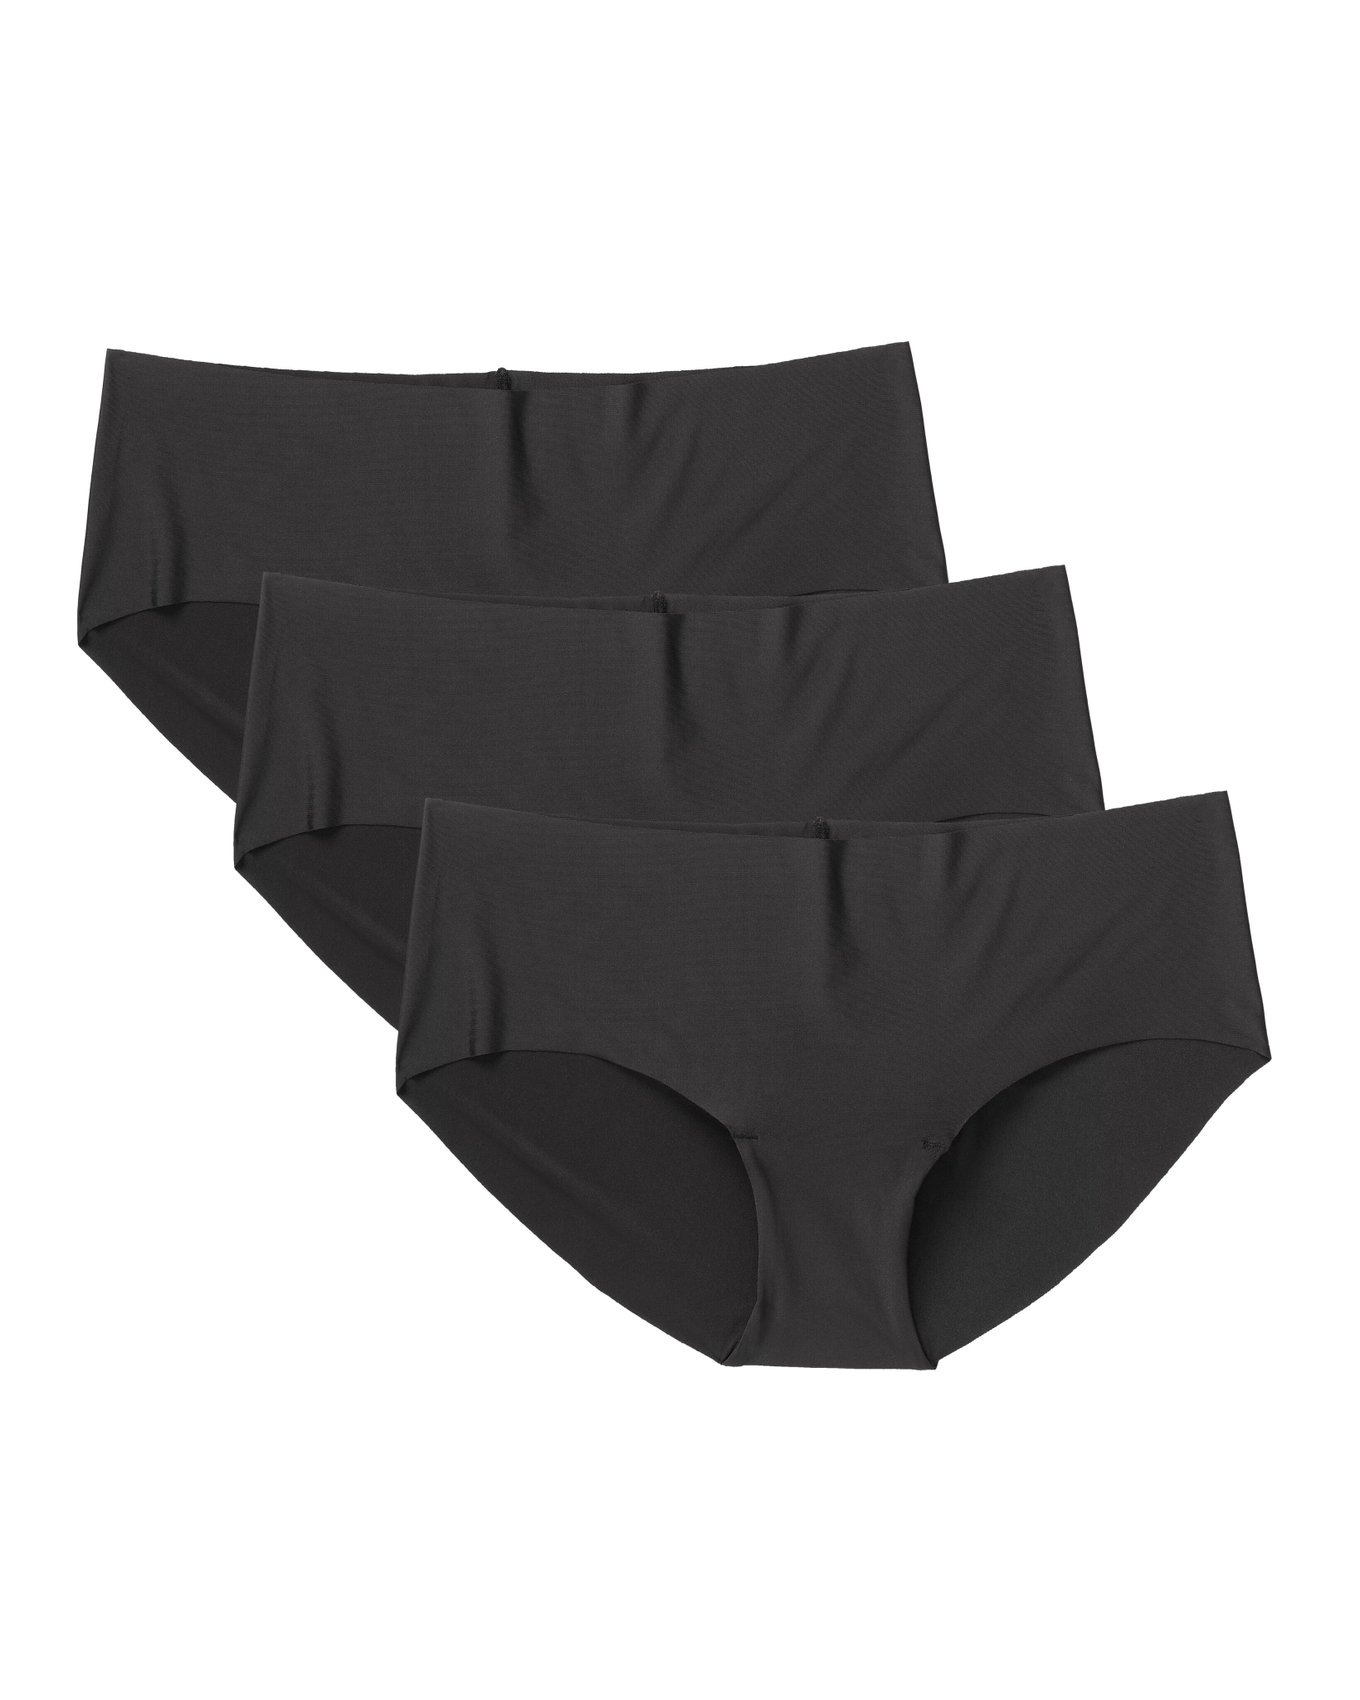 Leto Invisible Pack Hipster Black Plus Hipster Panties (Pack of 3)